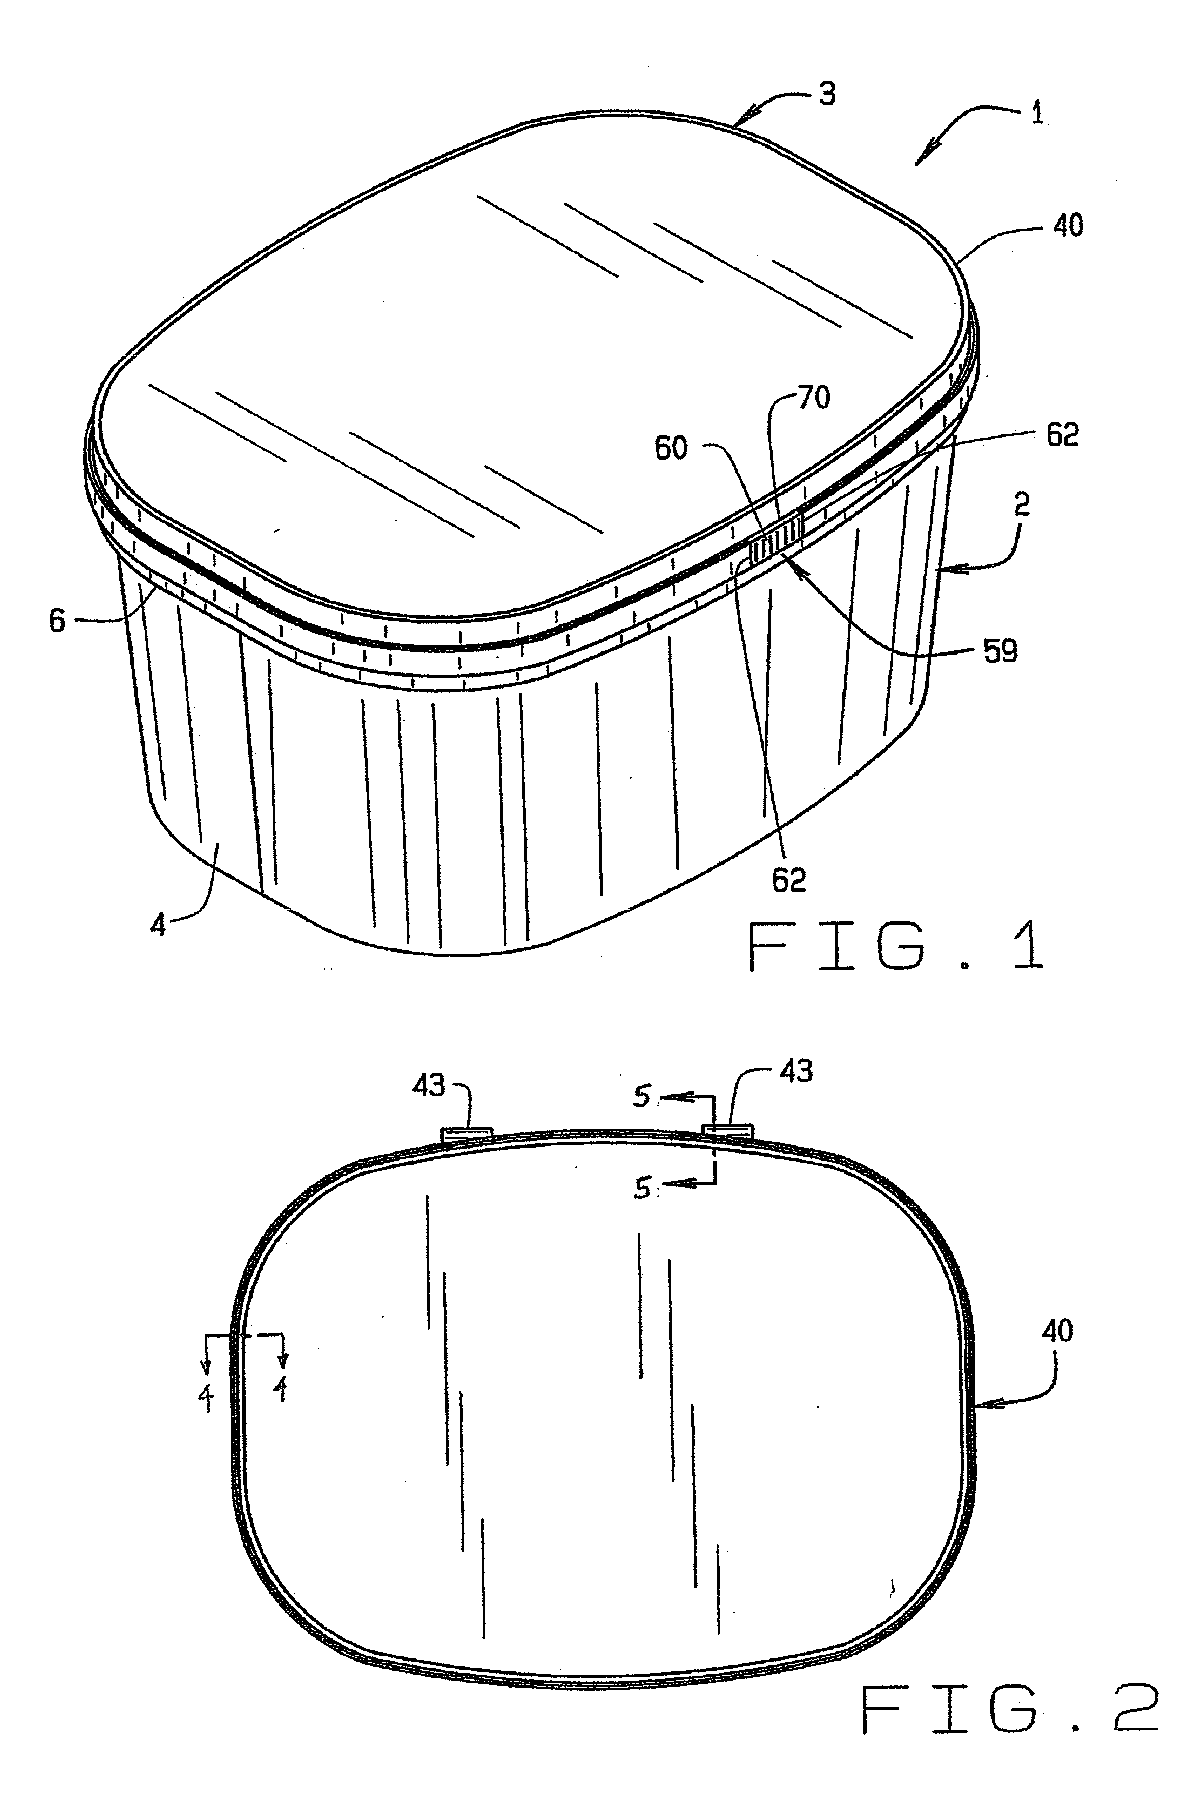 Hinged lid for a food container with plastic lower ring